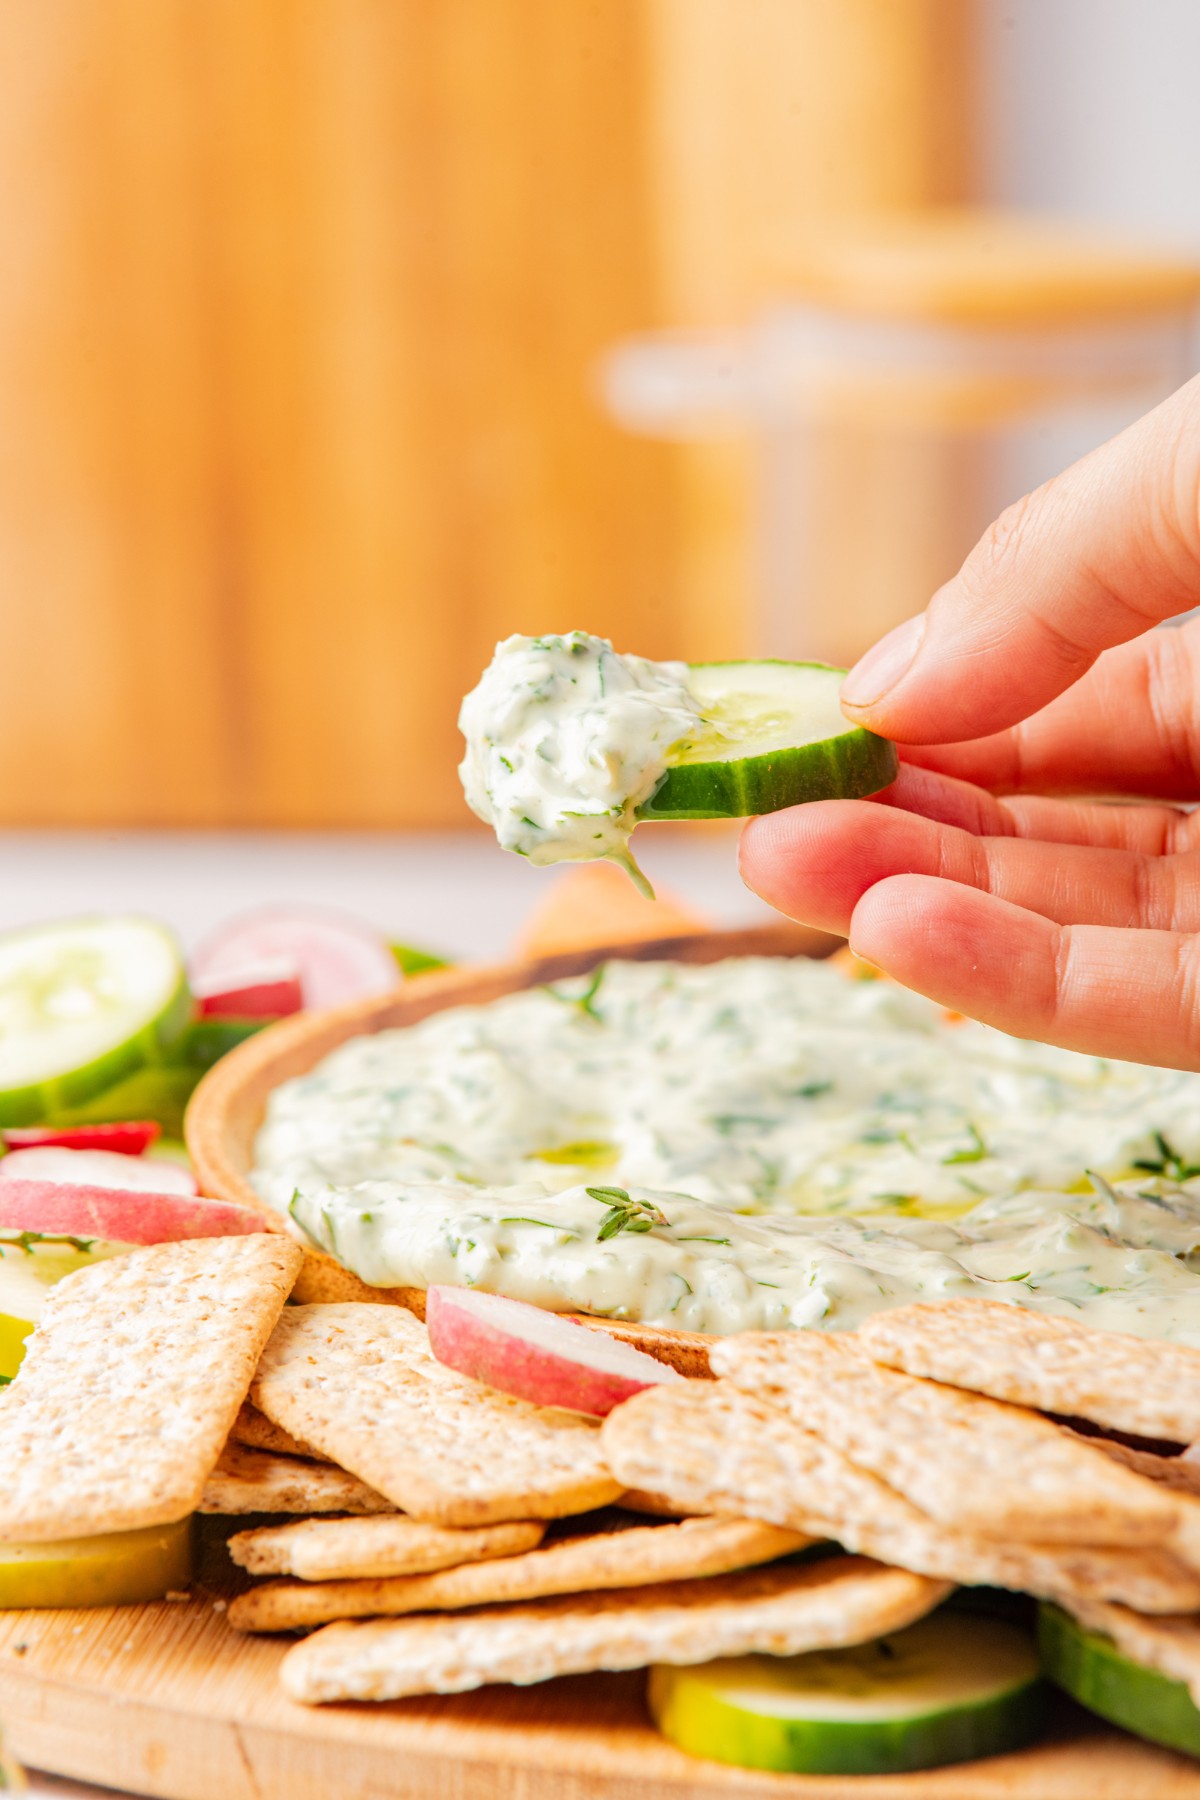 using a cucumber slice to scoop up green goddess dressing dip 